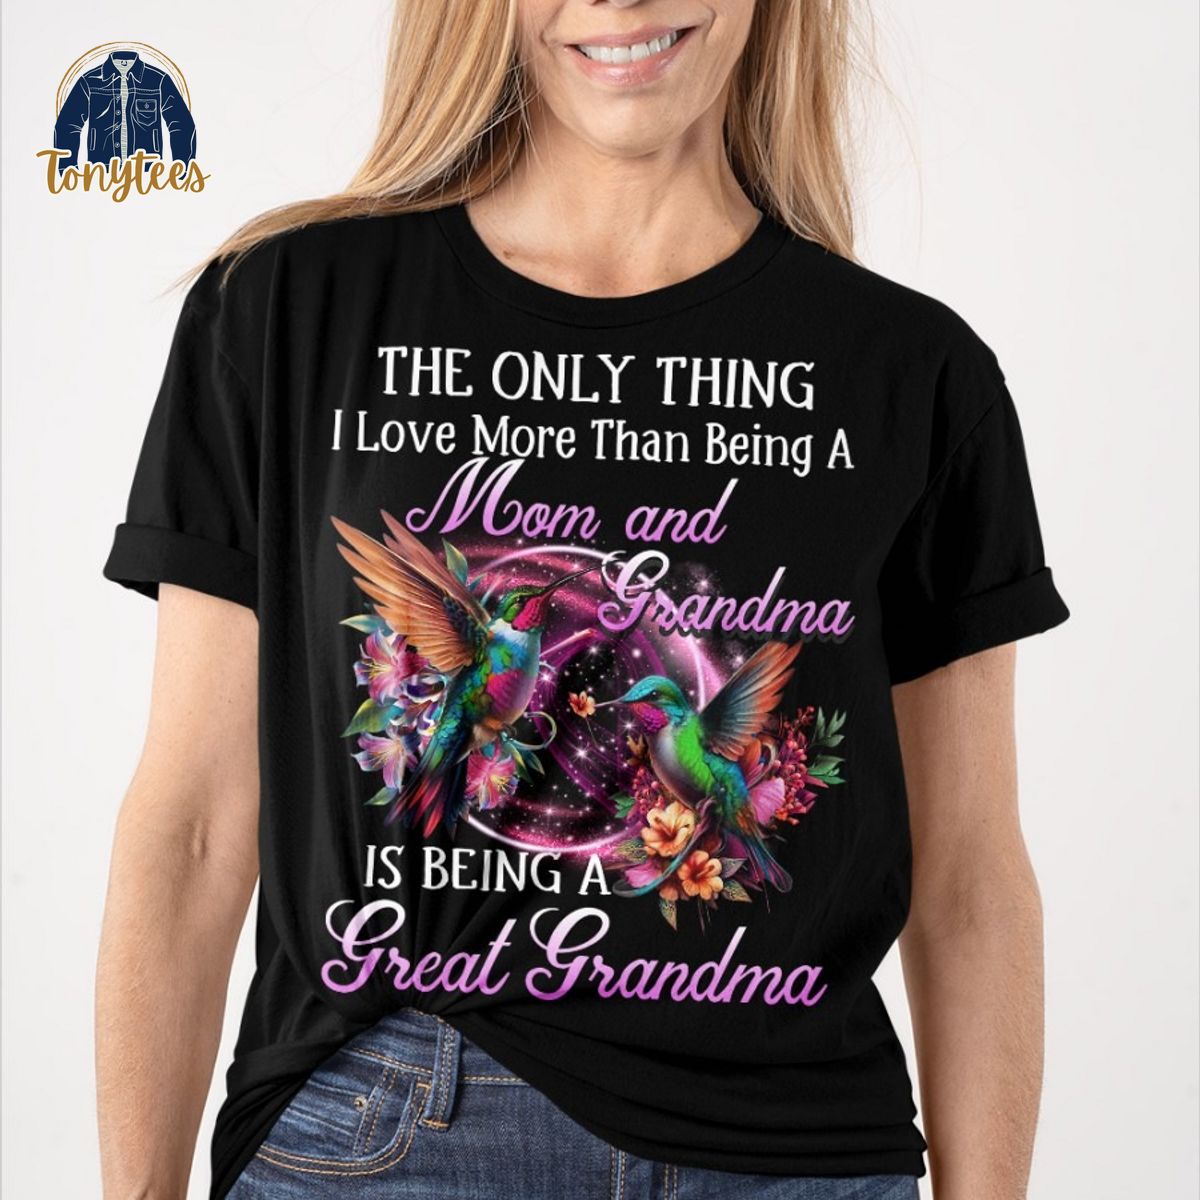 The only thing I love more than being a mom and grandma is being a great grandma shirt